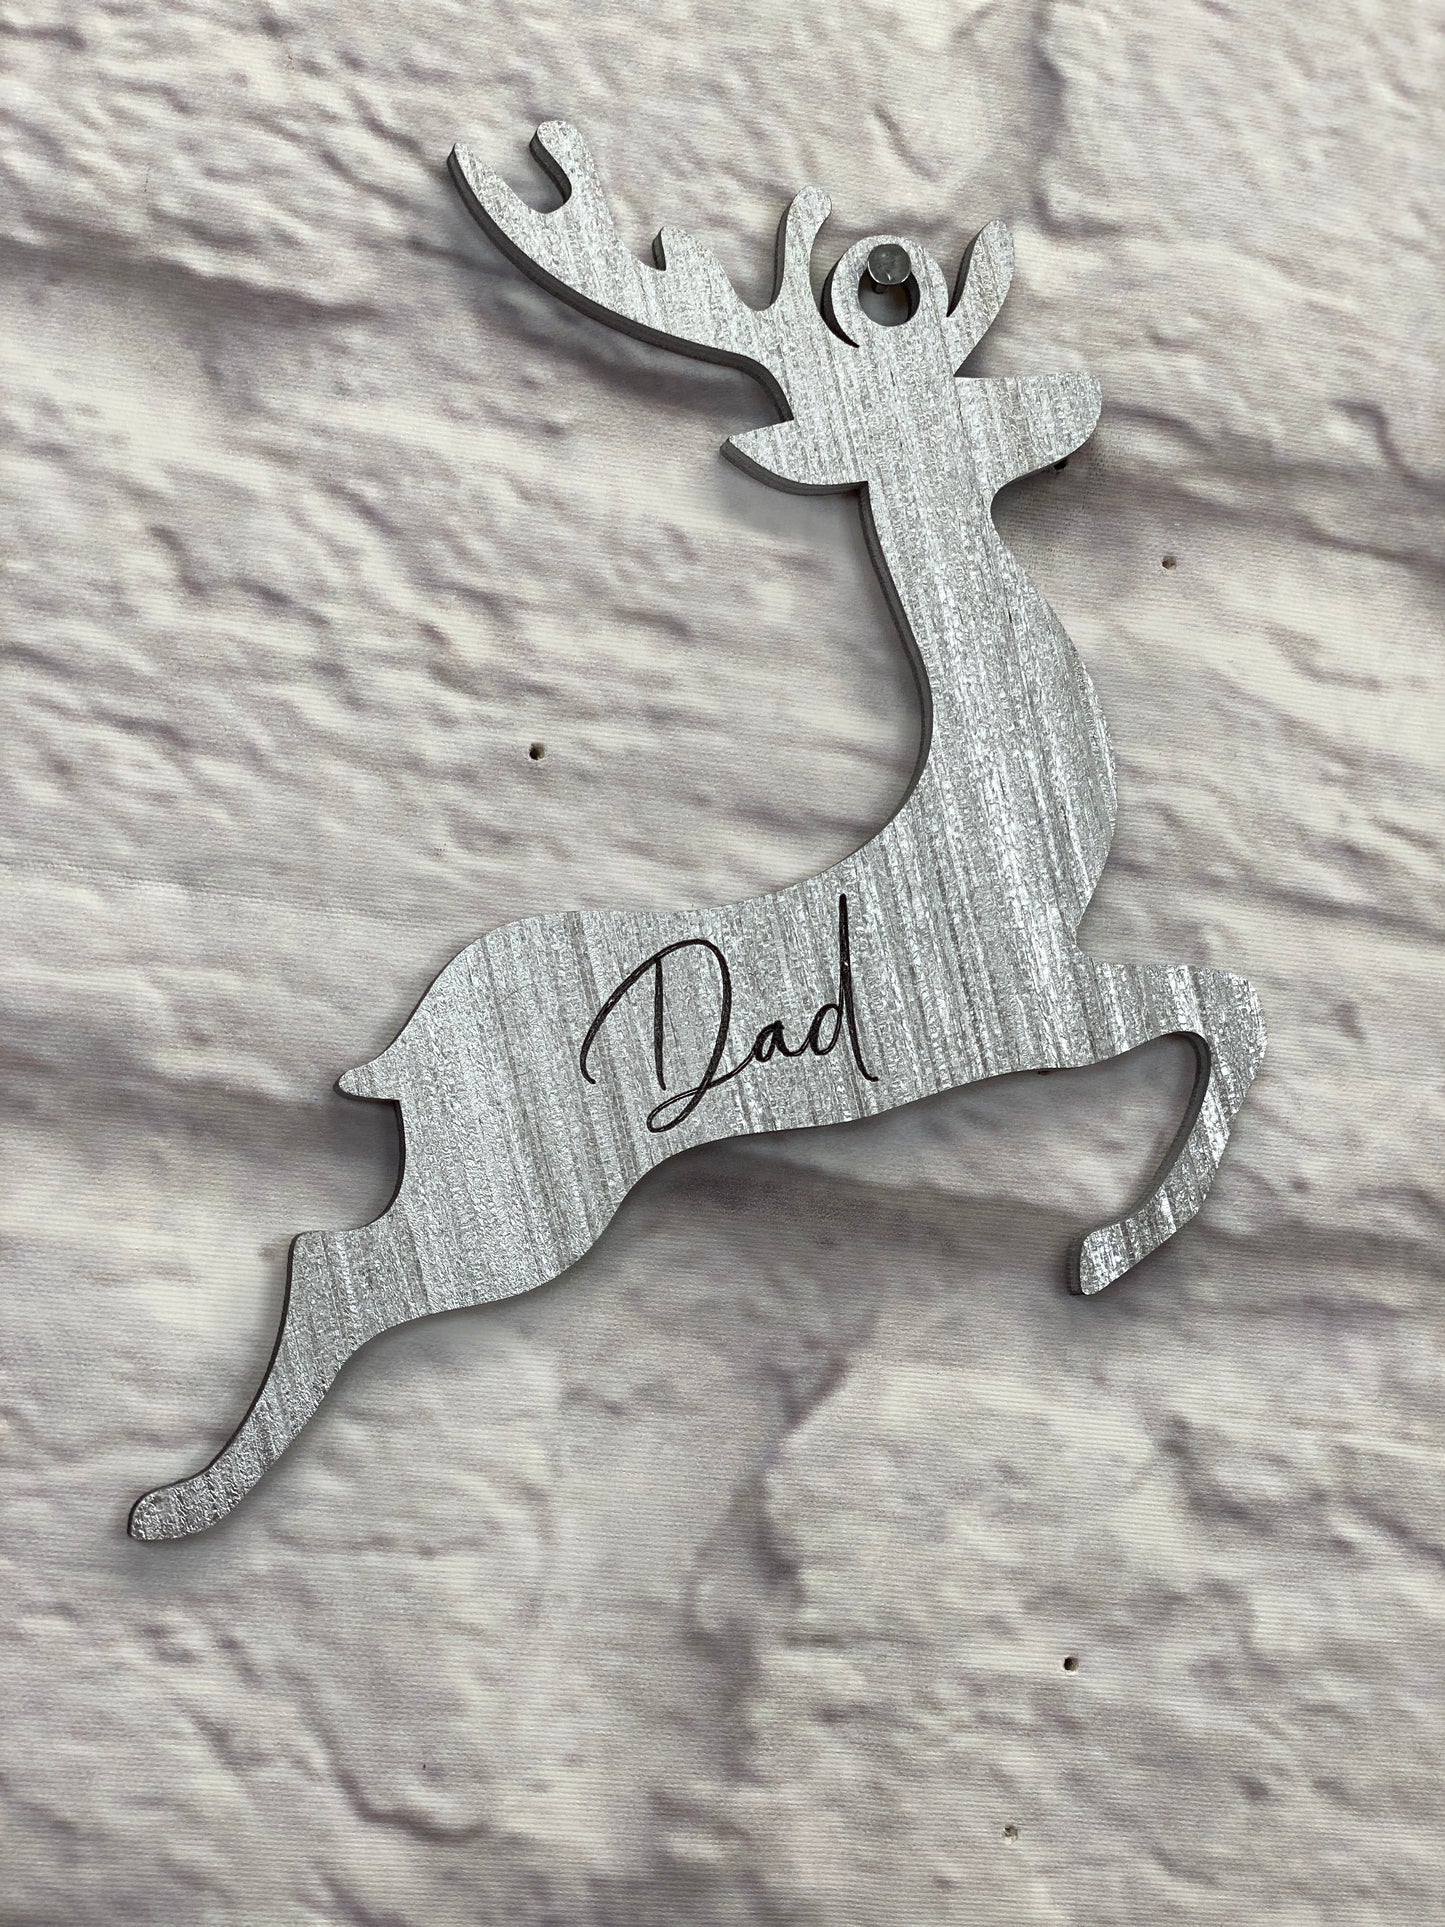 Personalized Reindeer Stocking Tags / Gift Tags / Christmas Ornaments  Laser Cut / Engraved Wooden Blank Ornament